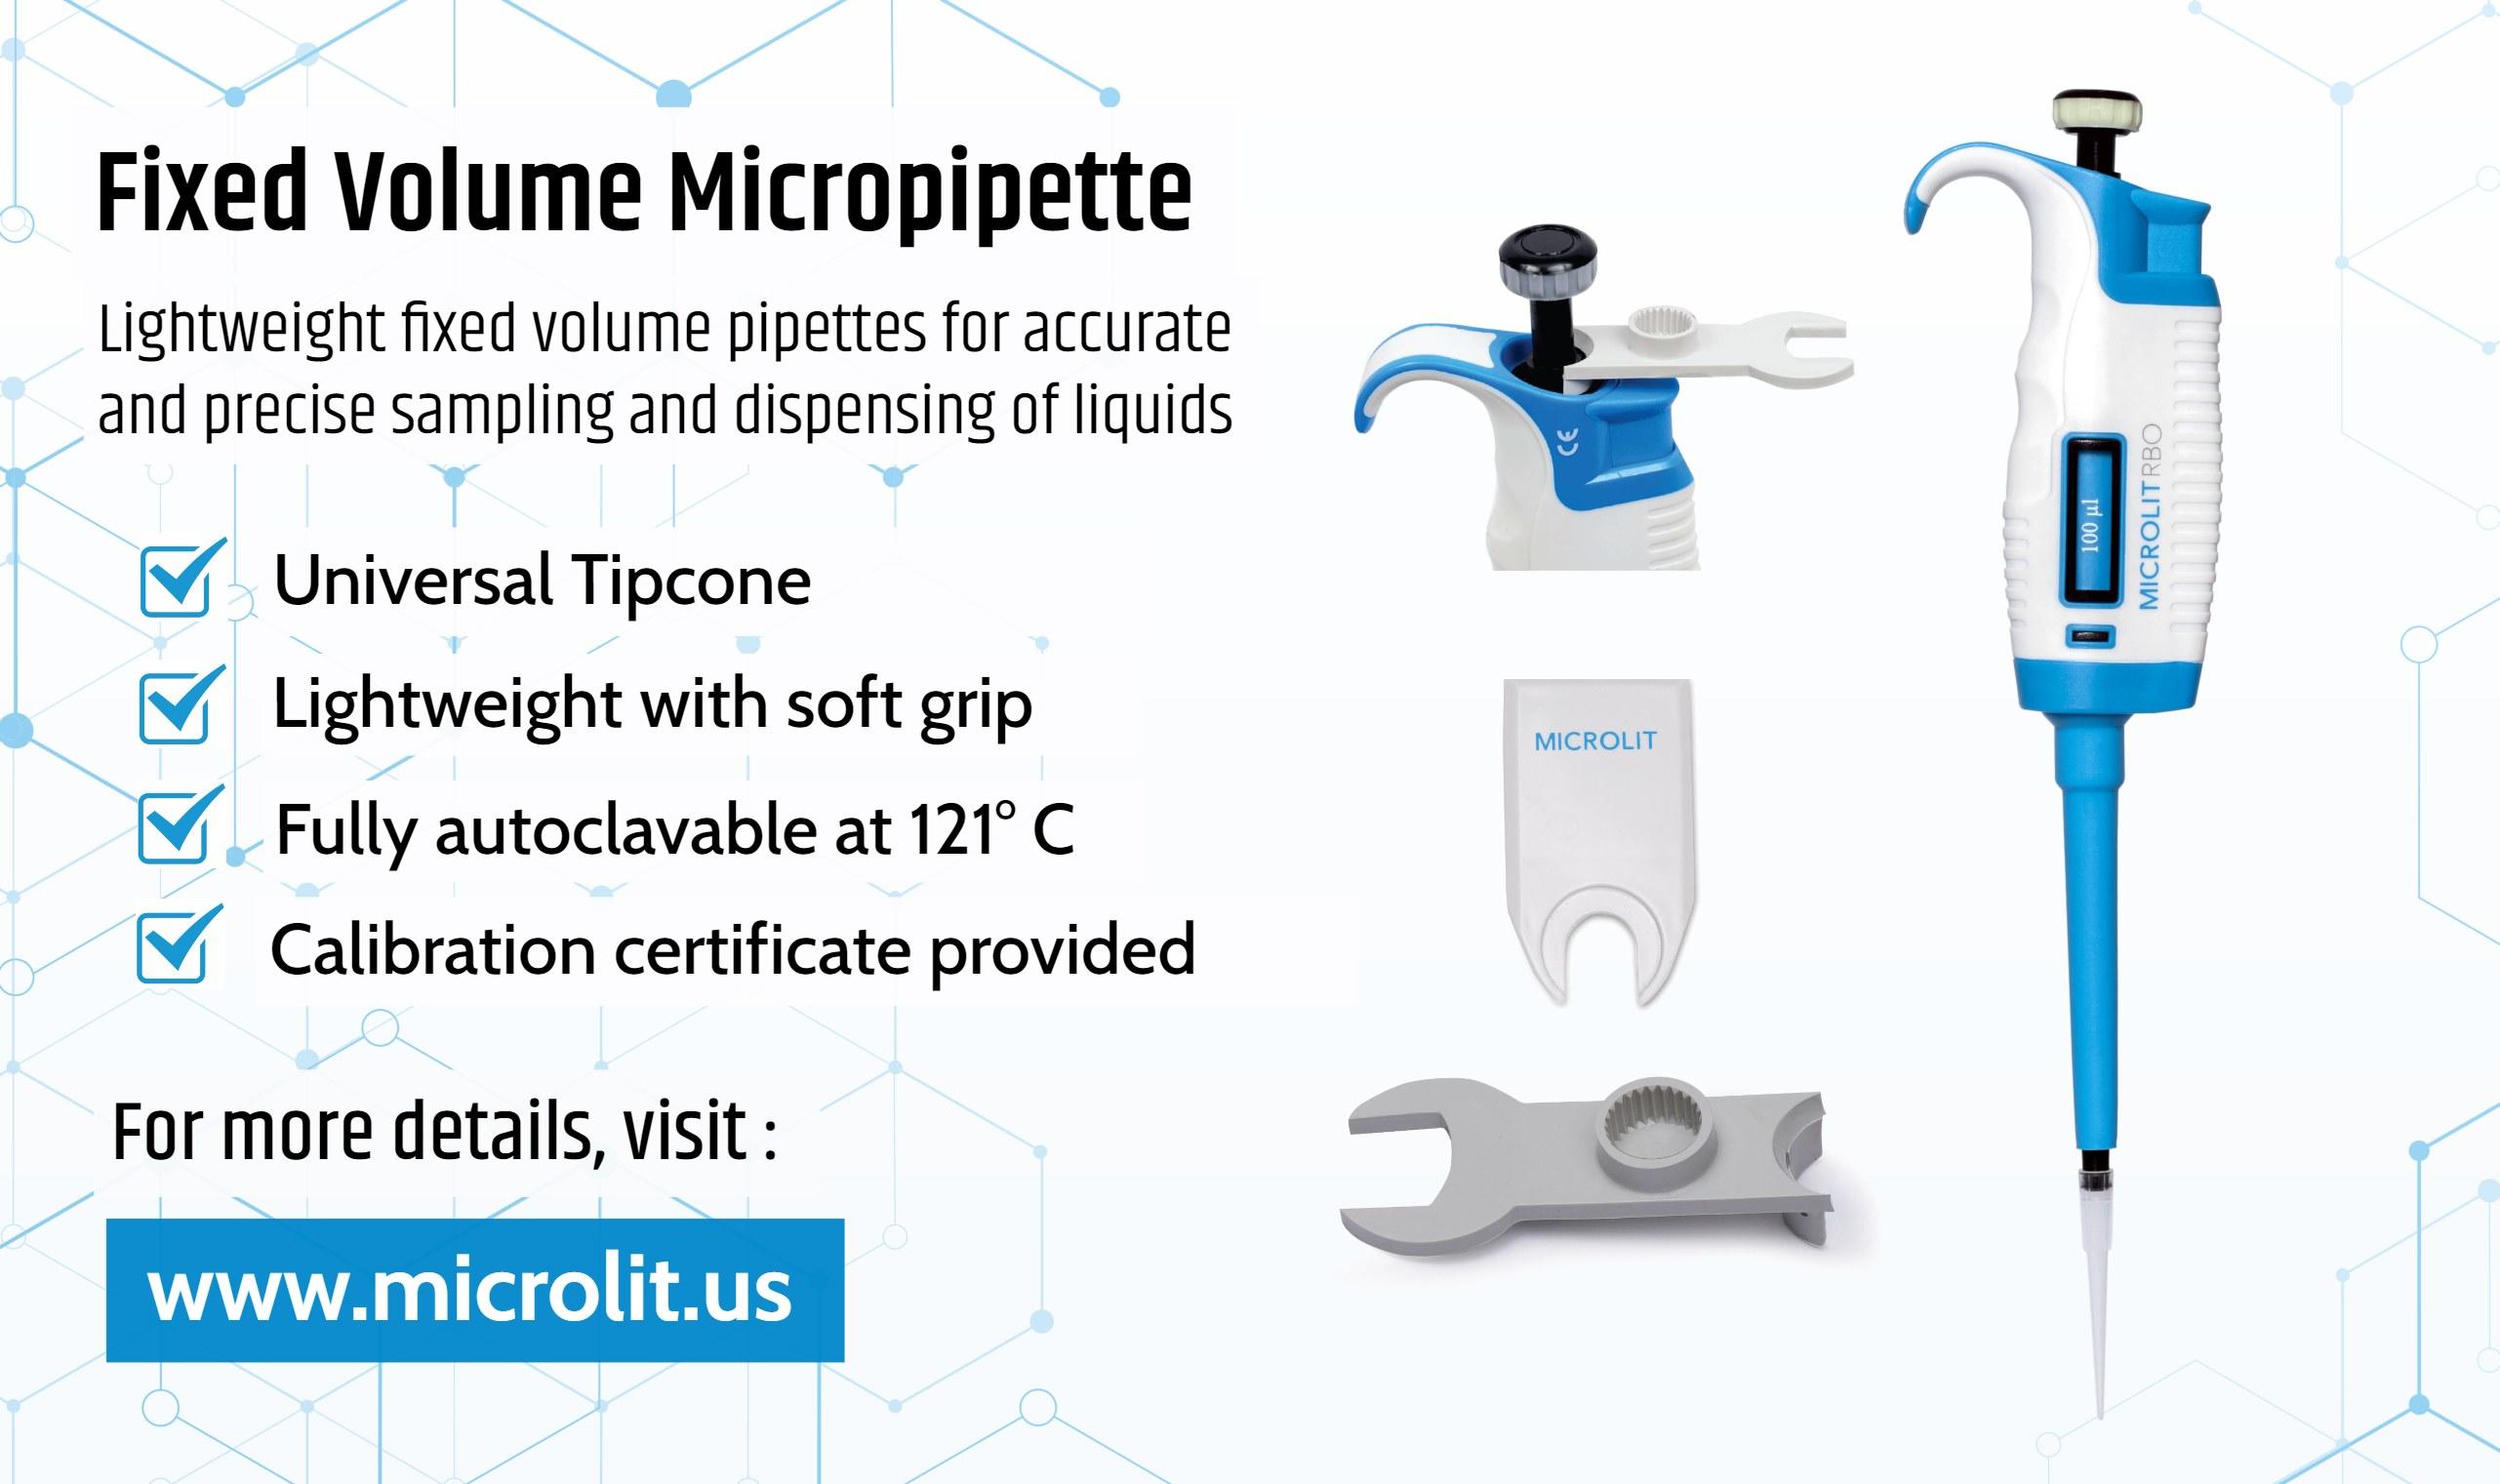 Image - Microlit offers the best #FixedVolumeMicropipette that is used for accurate and precise sampling and dispensi...